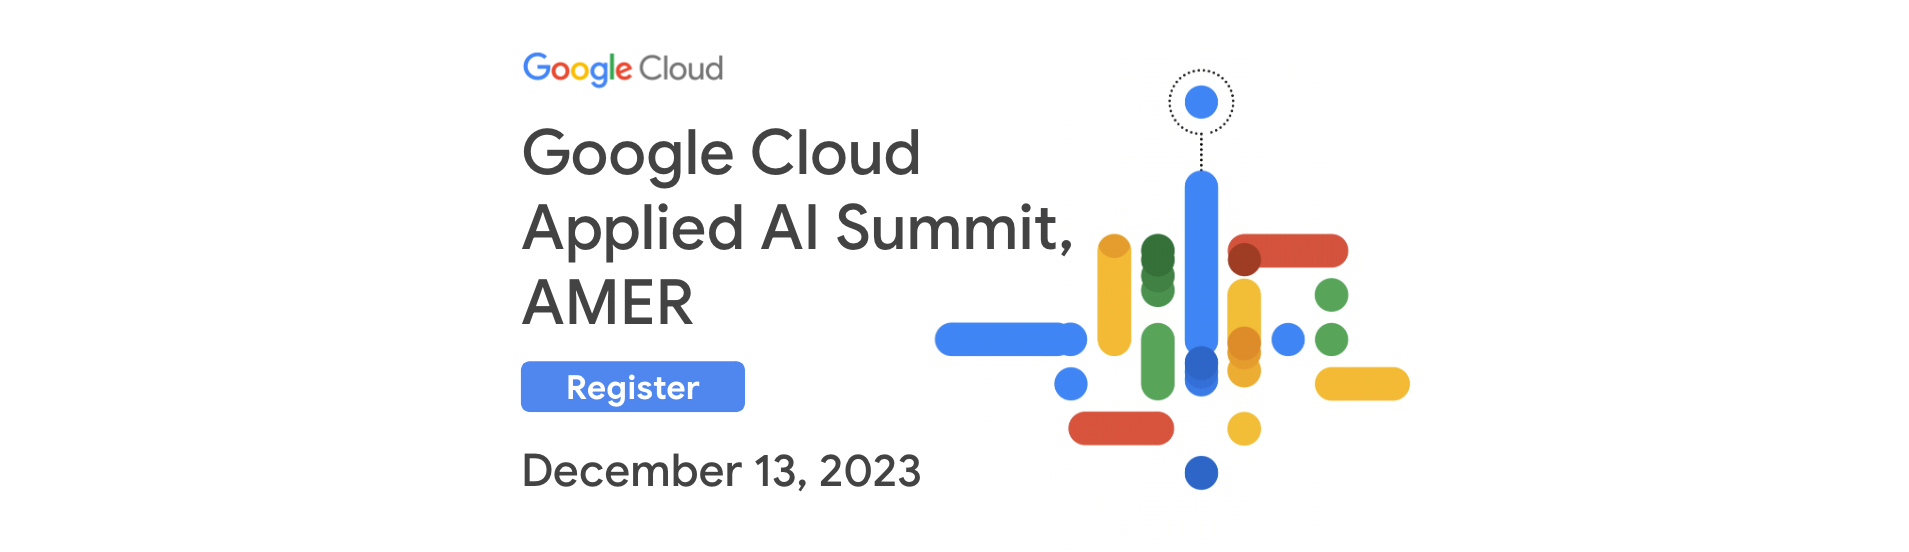 applied ai summit amer banner.png